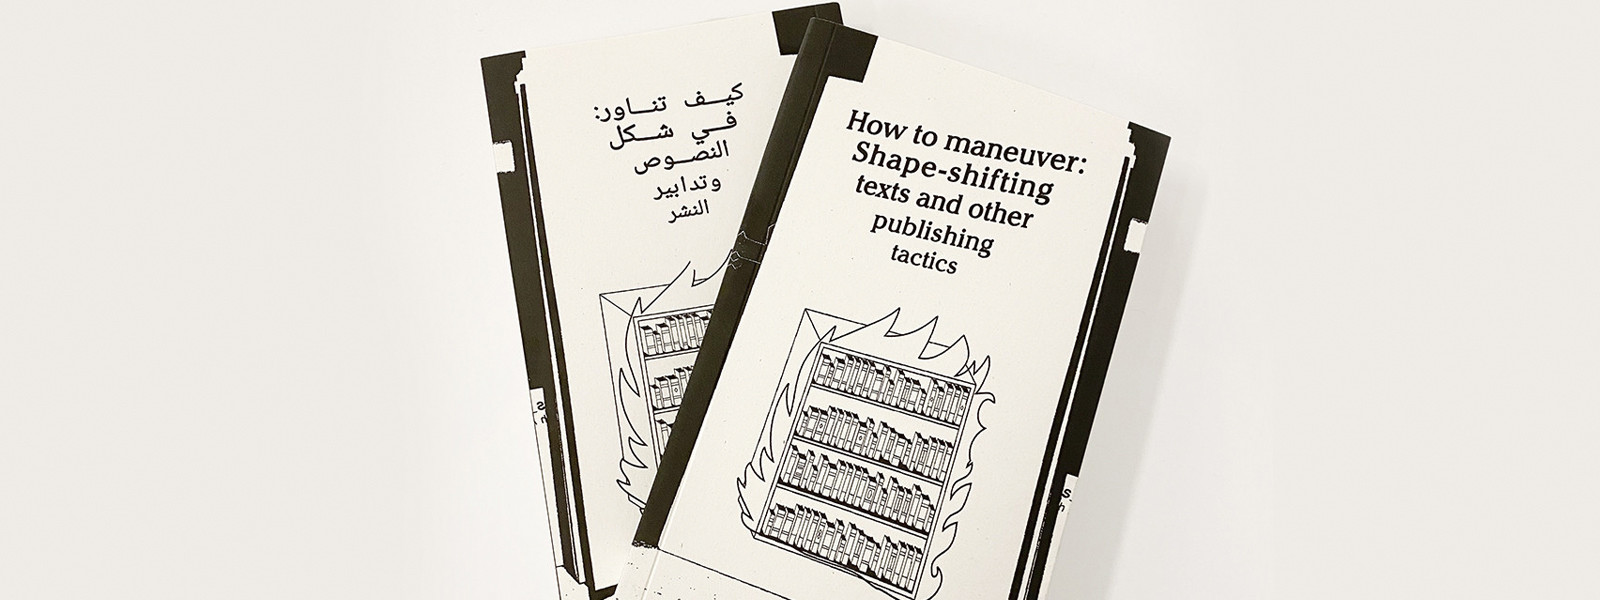 Book Launch - Book Launch: How to maneuver: Shapeshifting texts and other publishing tactics